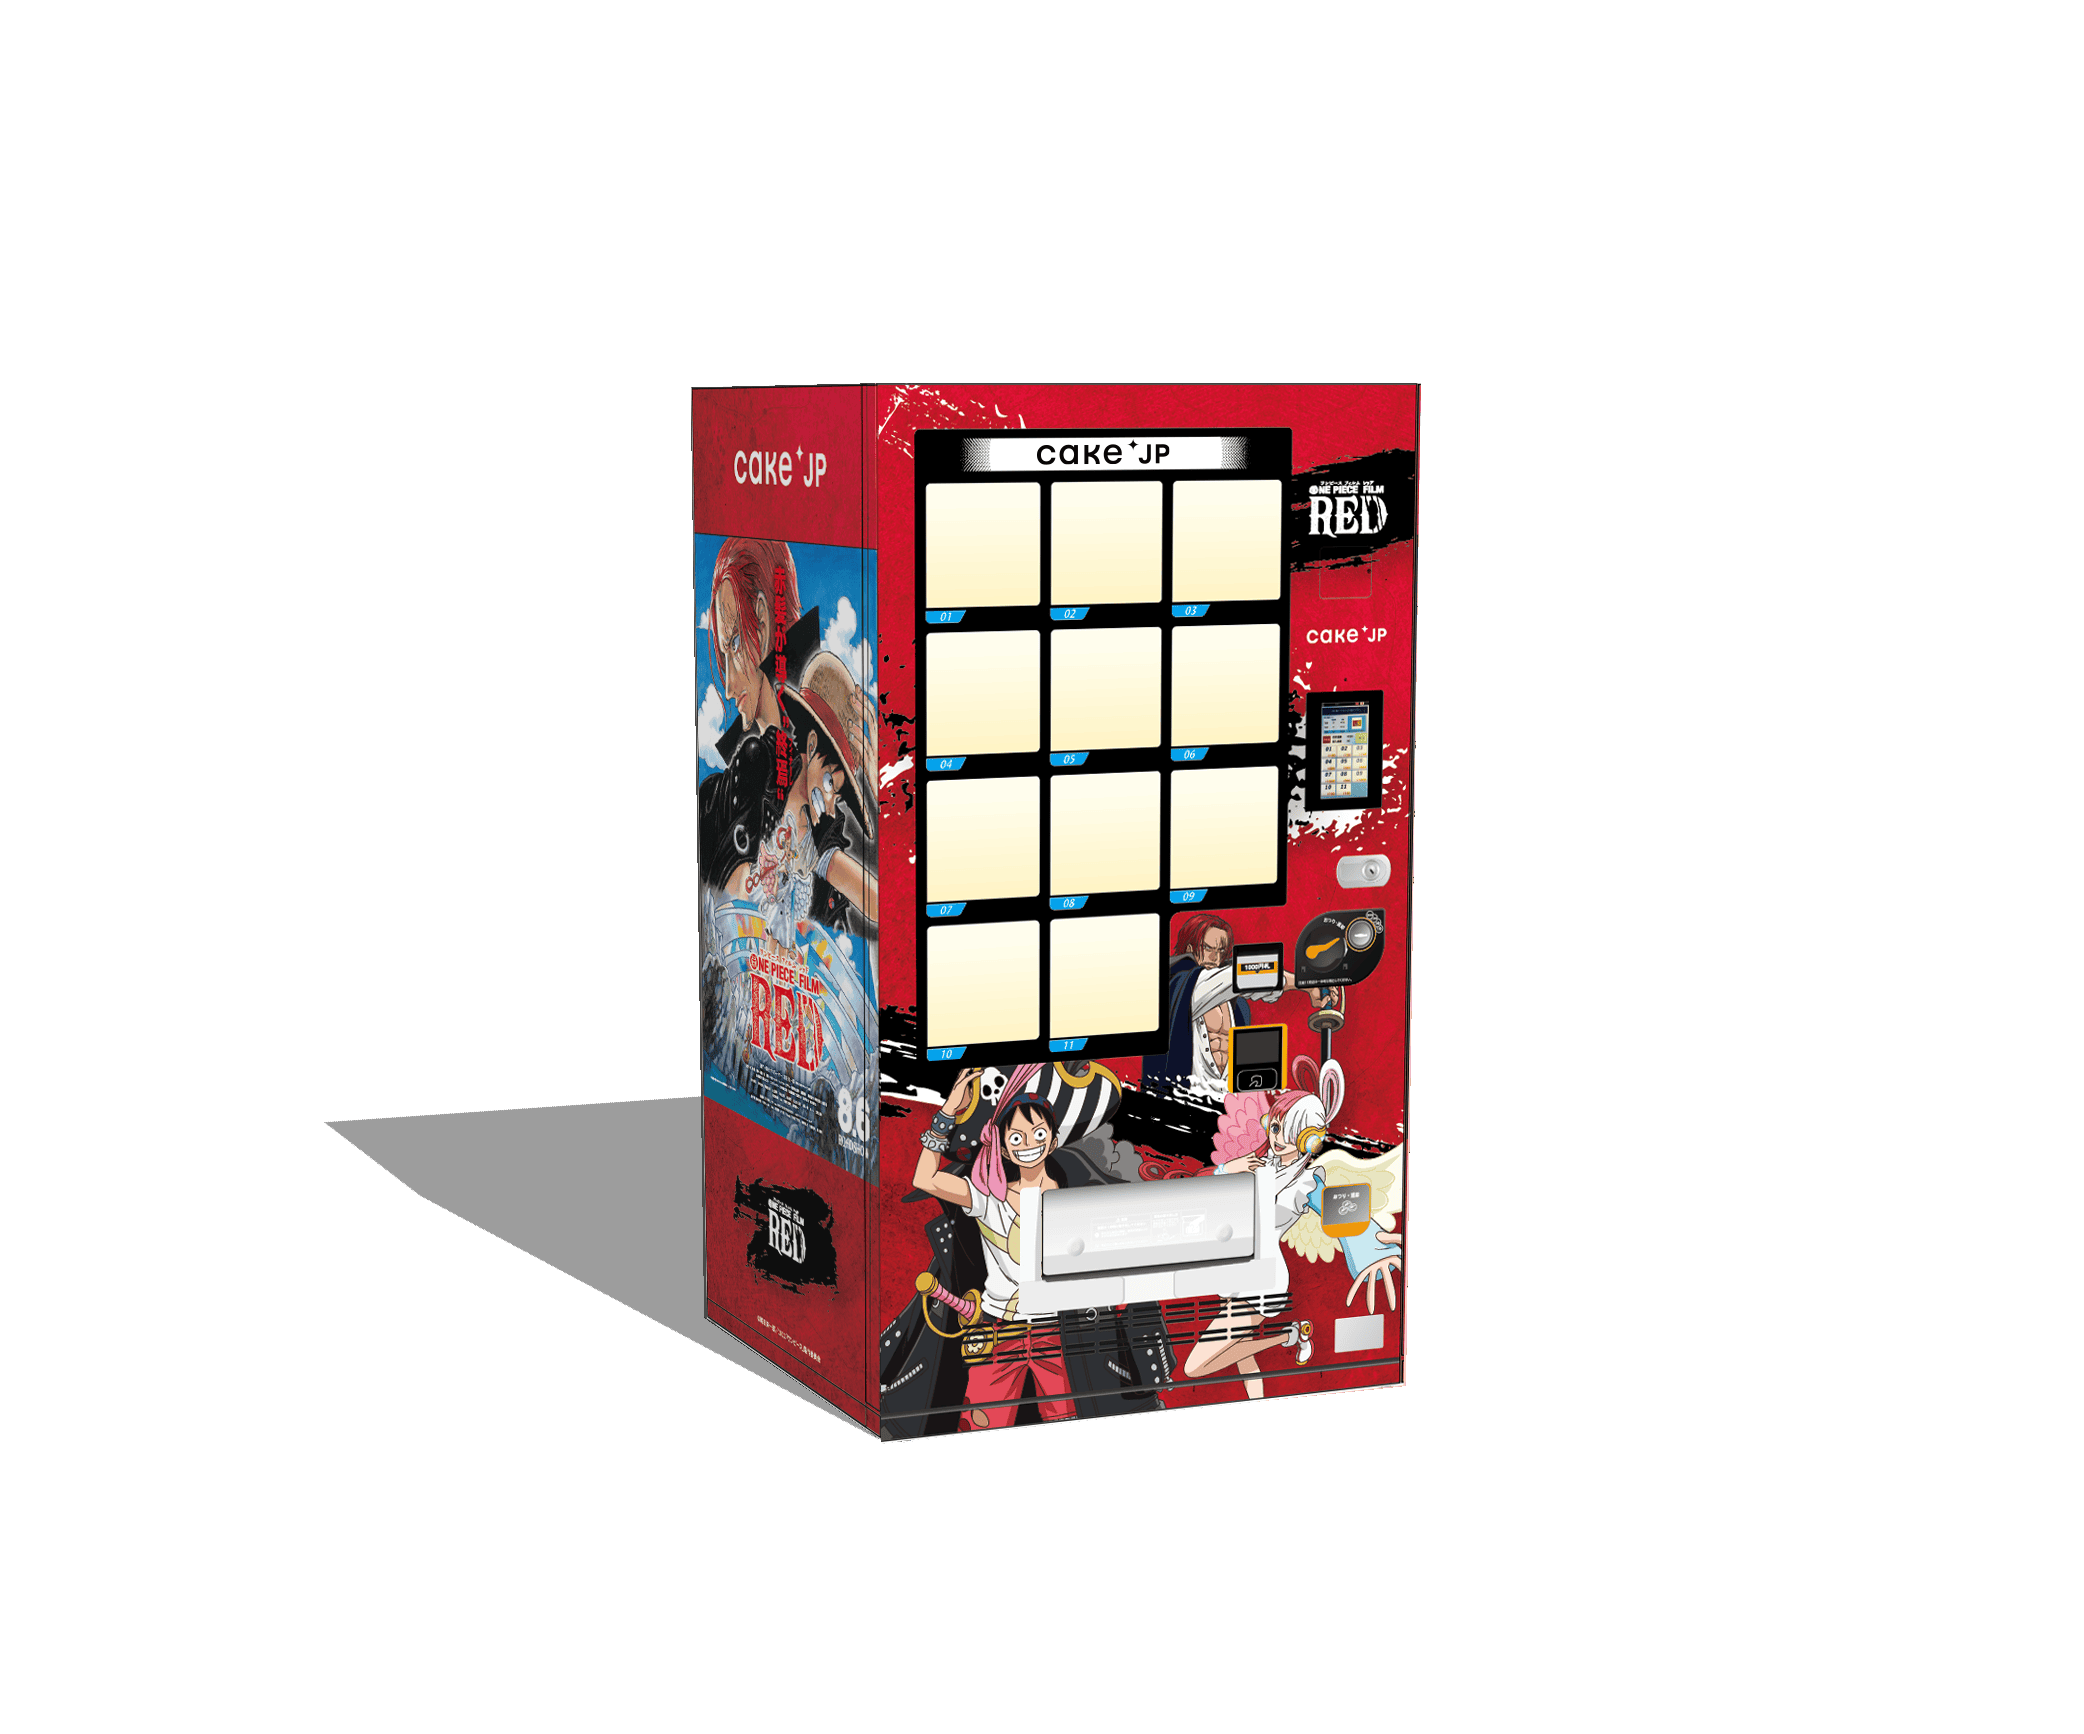 Ryokotomo - 1668303843 644 21d7a2ca one piece film red and cakejp collaboration vending machine appears